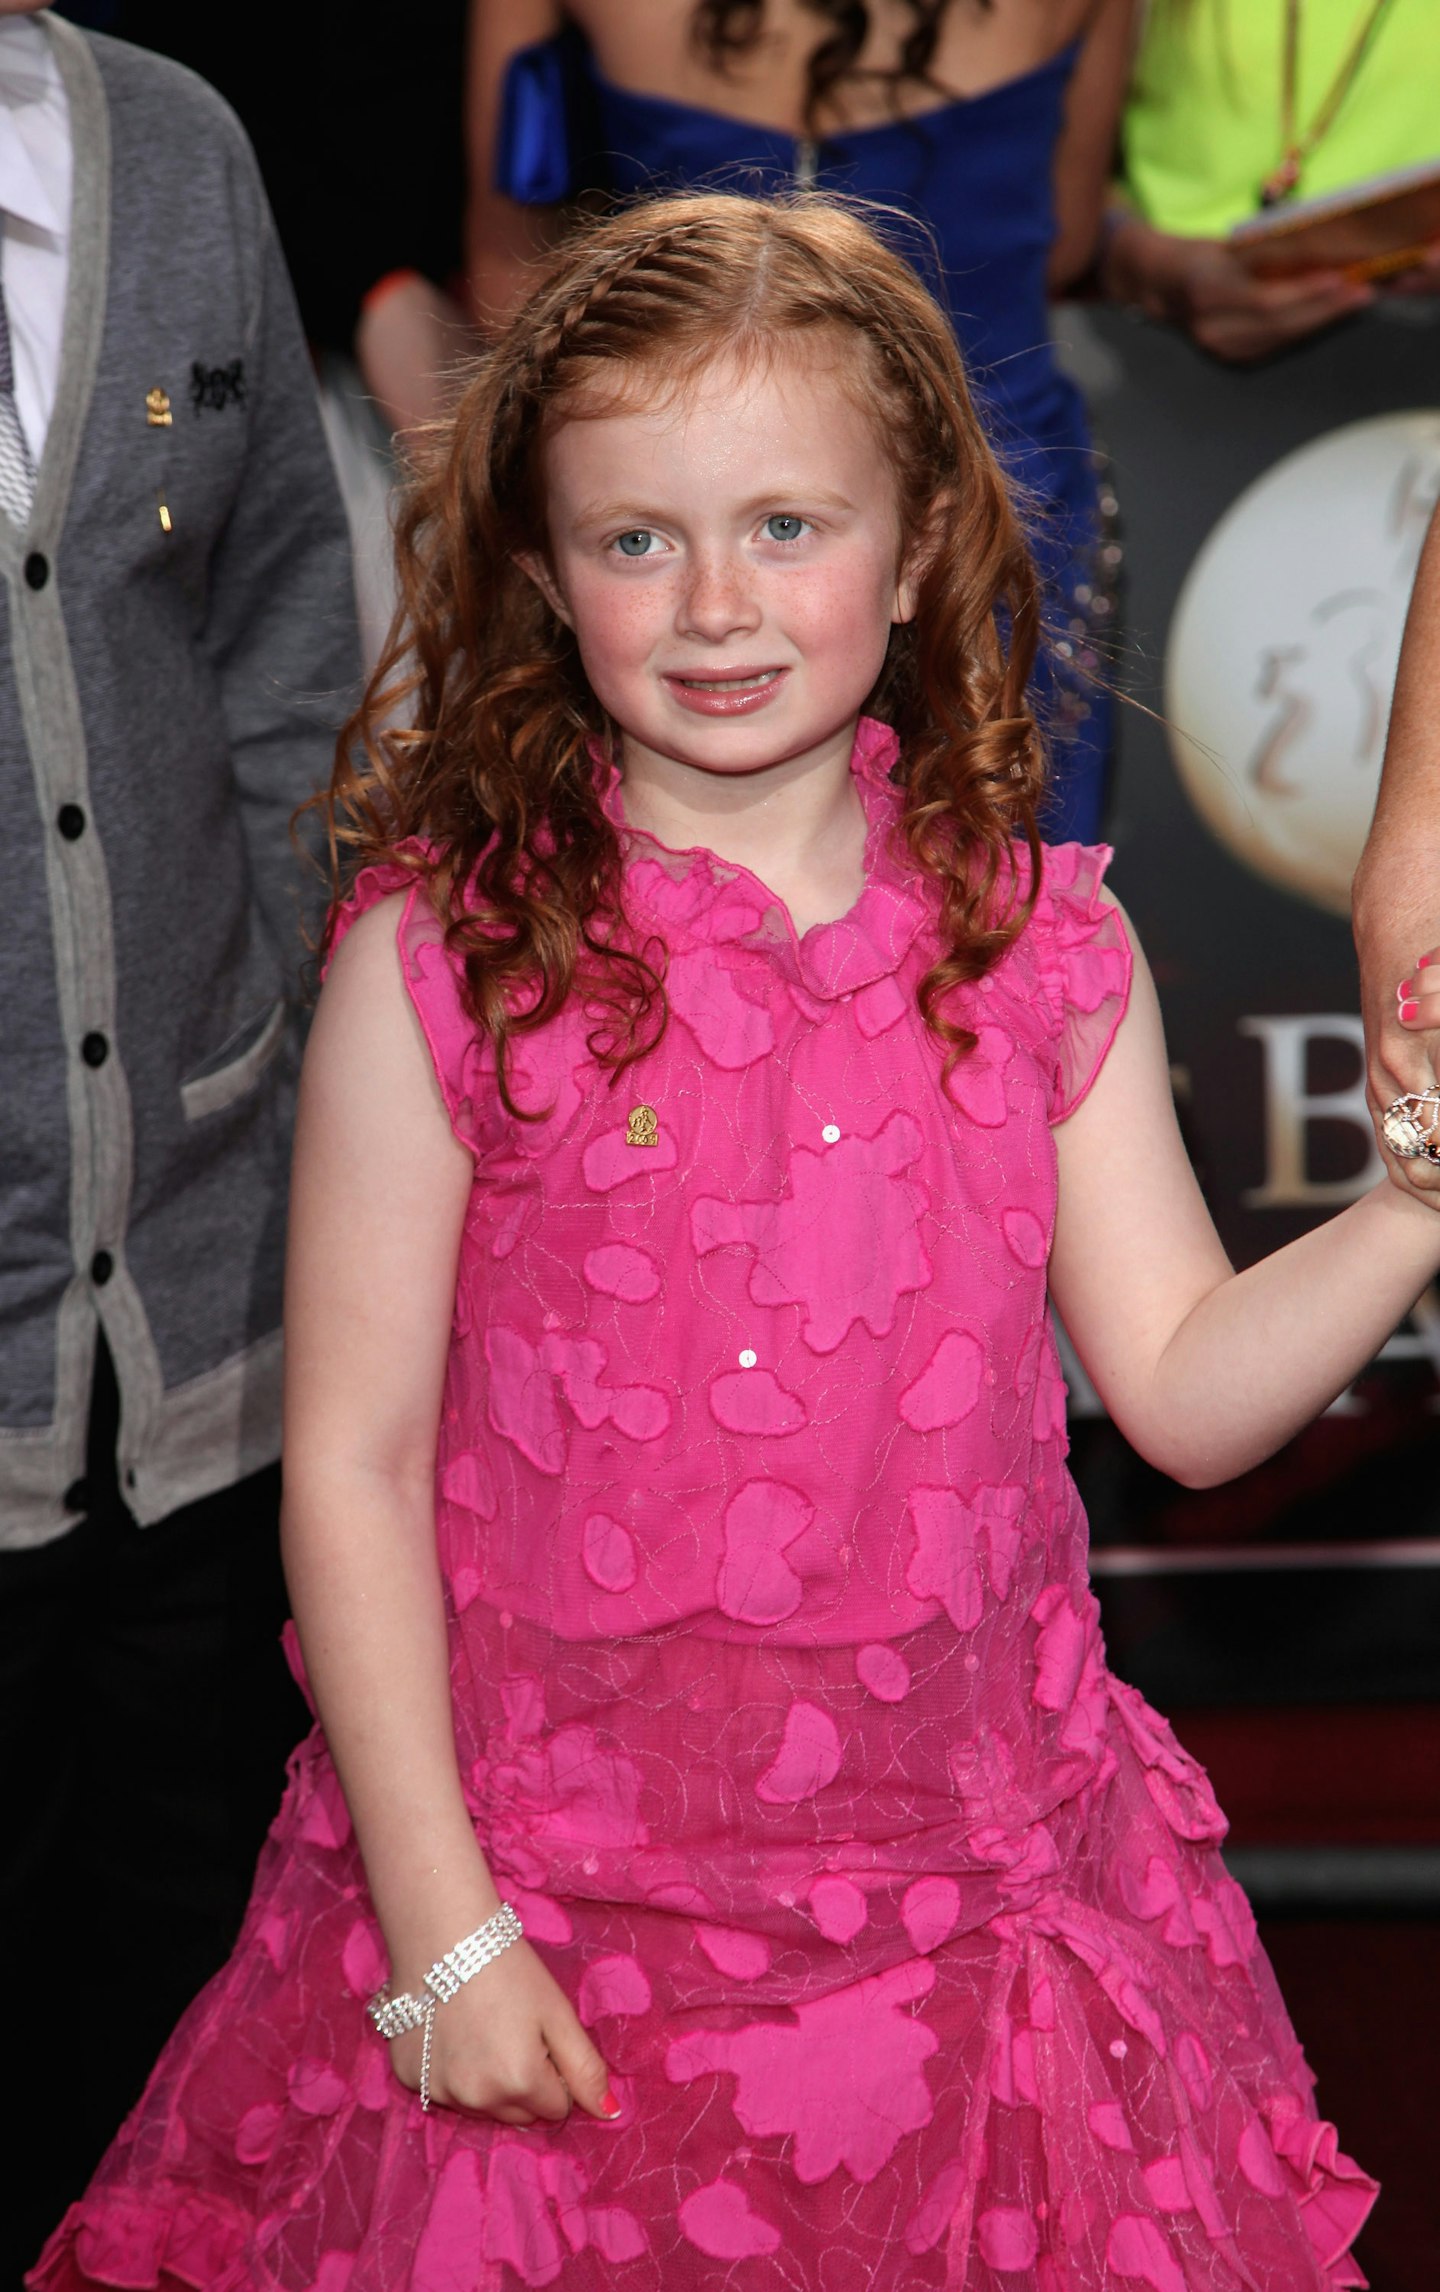 Maisie-smith-eastenders-now